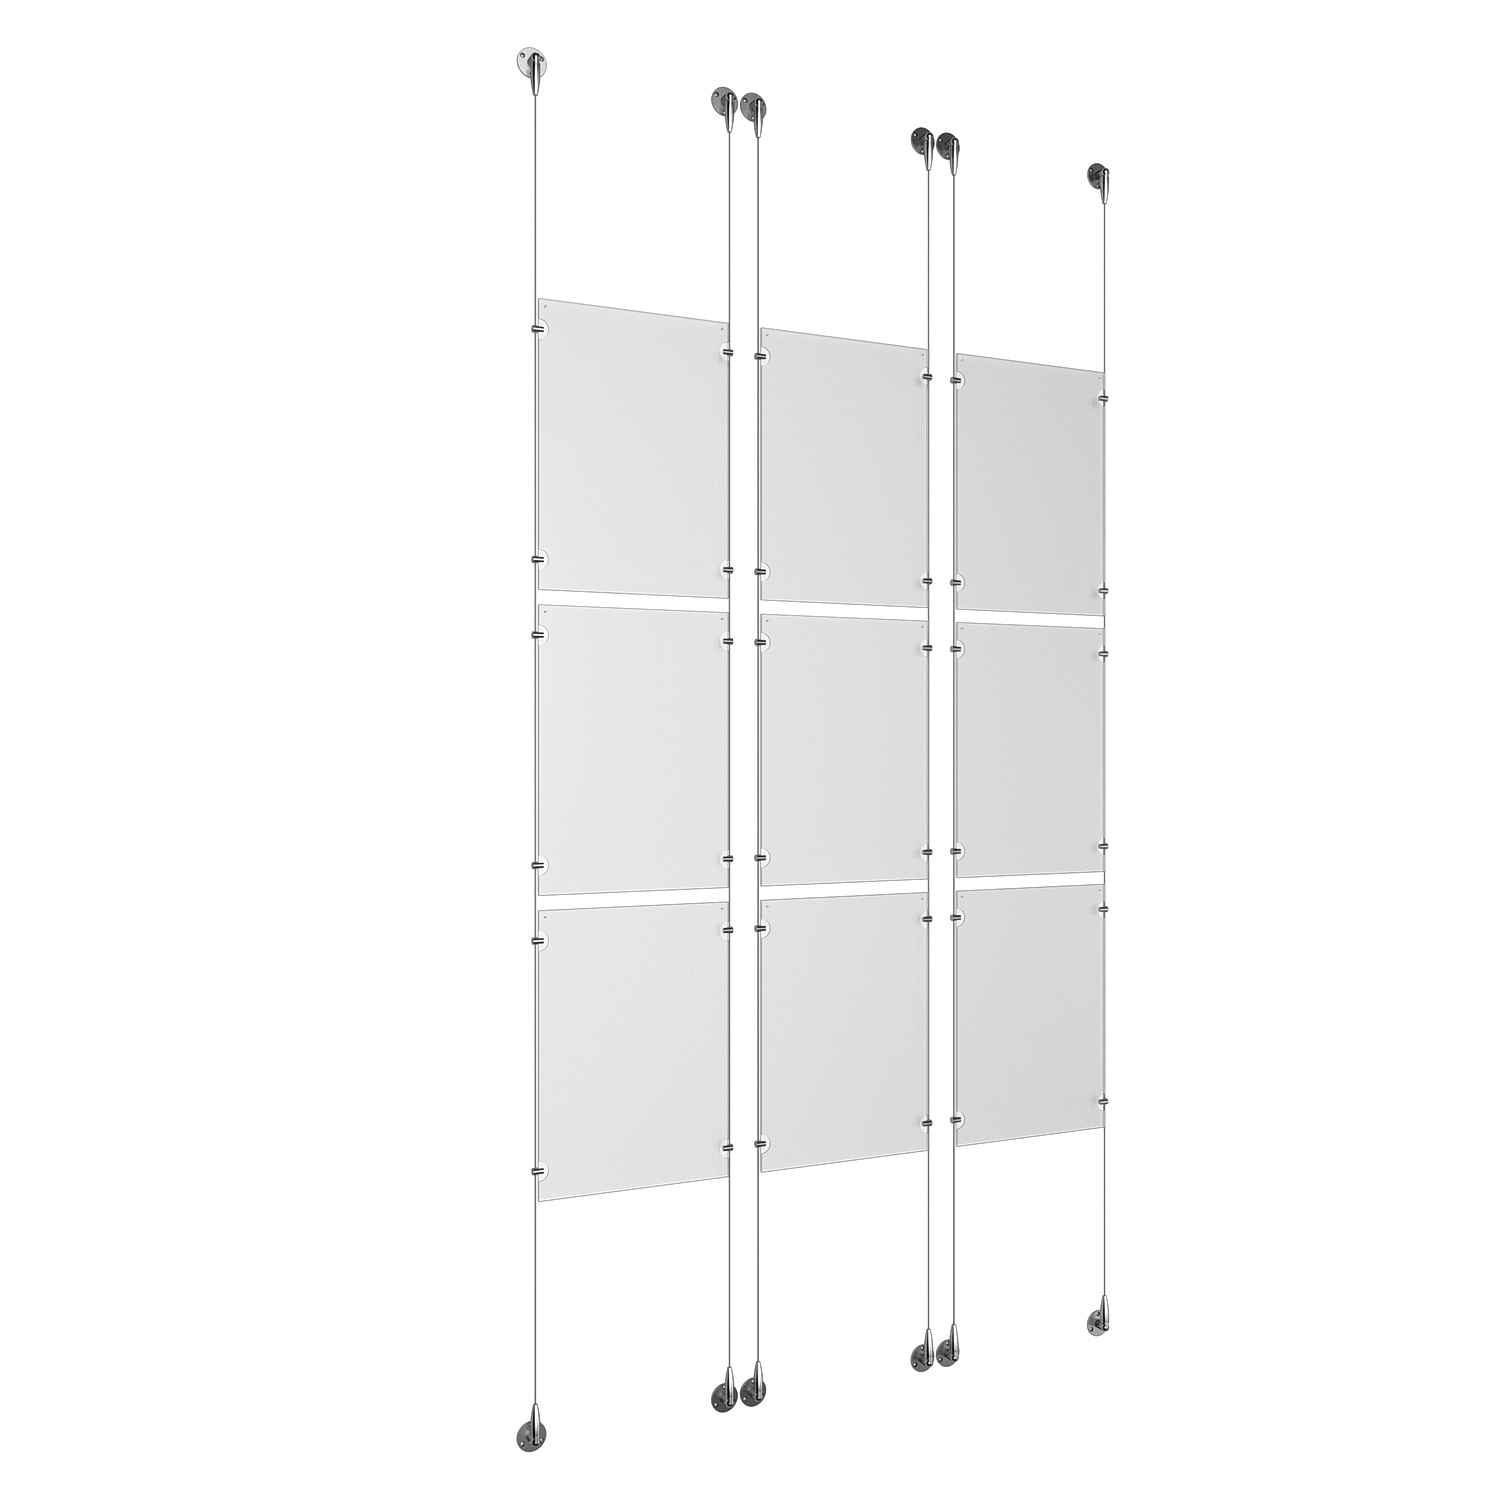 (3) 11'' Width x 17'' Height Clear Acrylic Frame & (1) Aluminum Chrome Polished Adjustable Angle Signature Cable Systems with (6) Single-Sided Panel Grippers (6) Double-Sided Panel Grippers